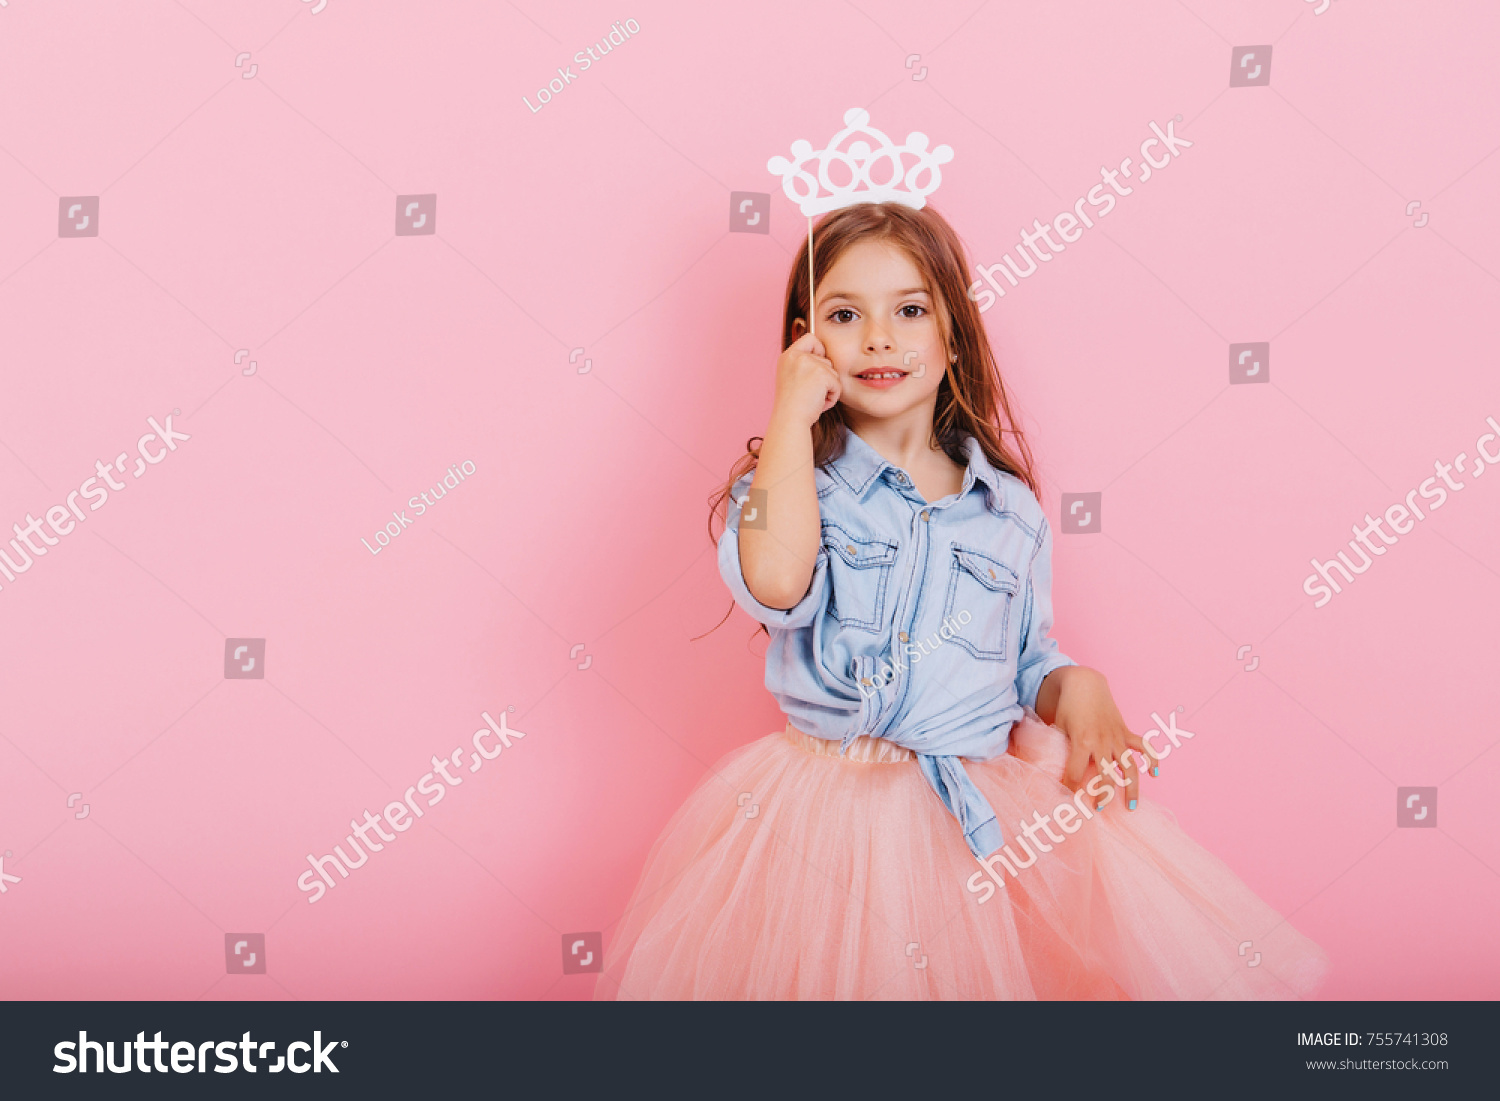 Pretty sweet little girl with long brunette hair in tulle skirt holding white crown on head isolated on pink background. Beautiful joyful child expressing true emotions. Place for text #755741308